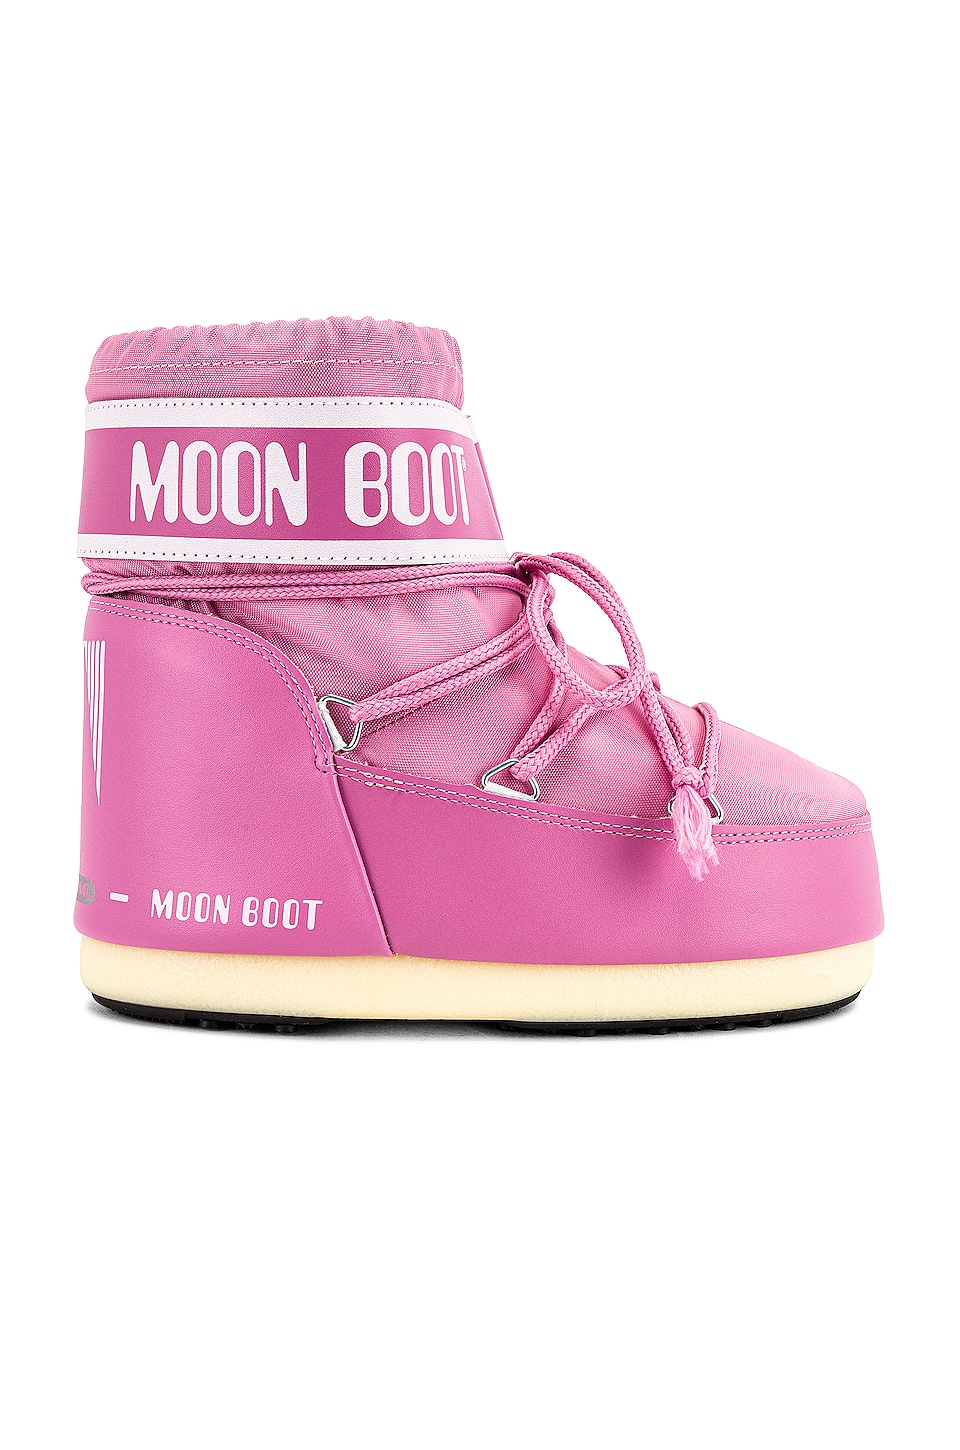 MOON BOOT Classic Low 2 Bootie in Pink REVOLVE